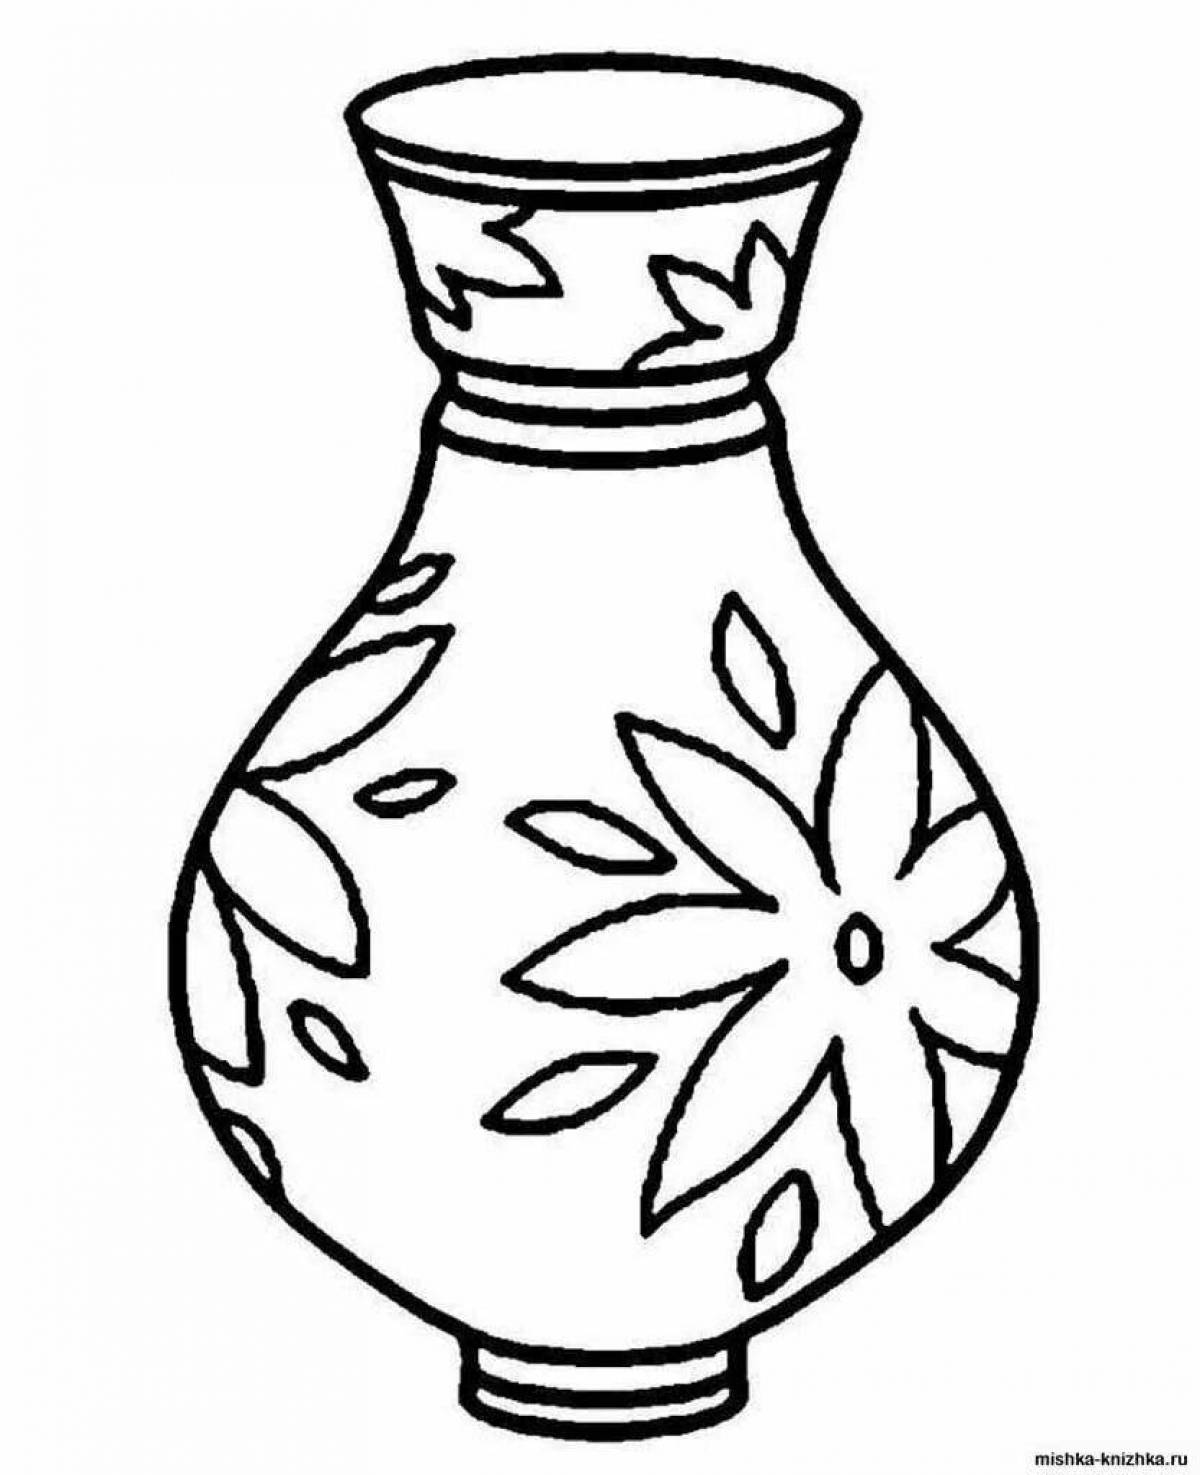 Outstanding vase coloring page for juniors